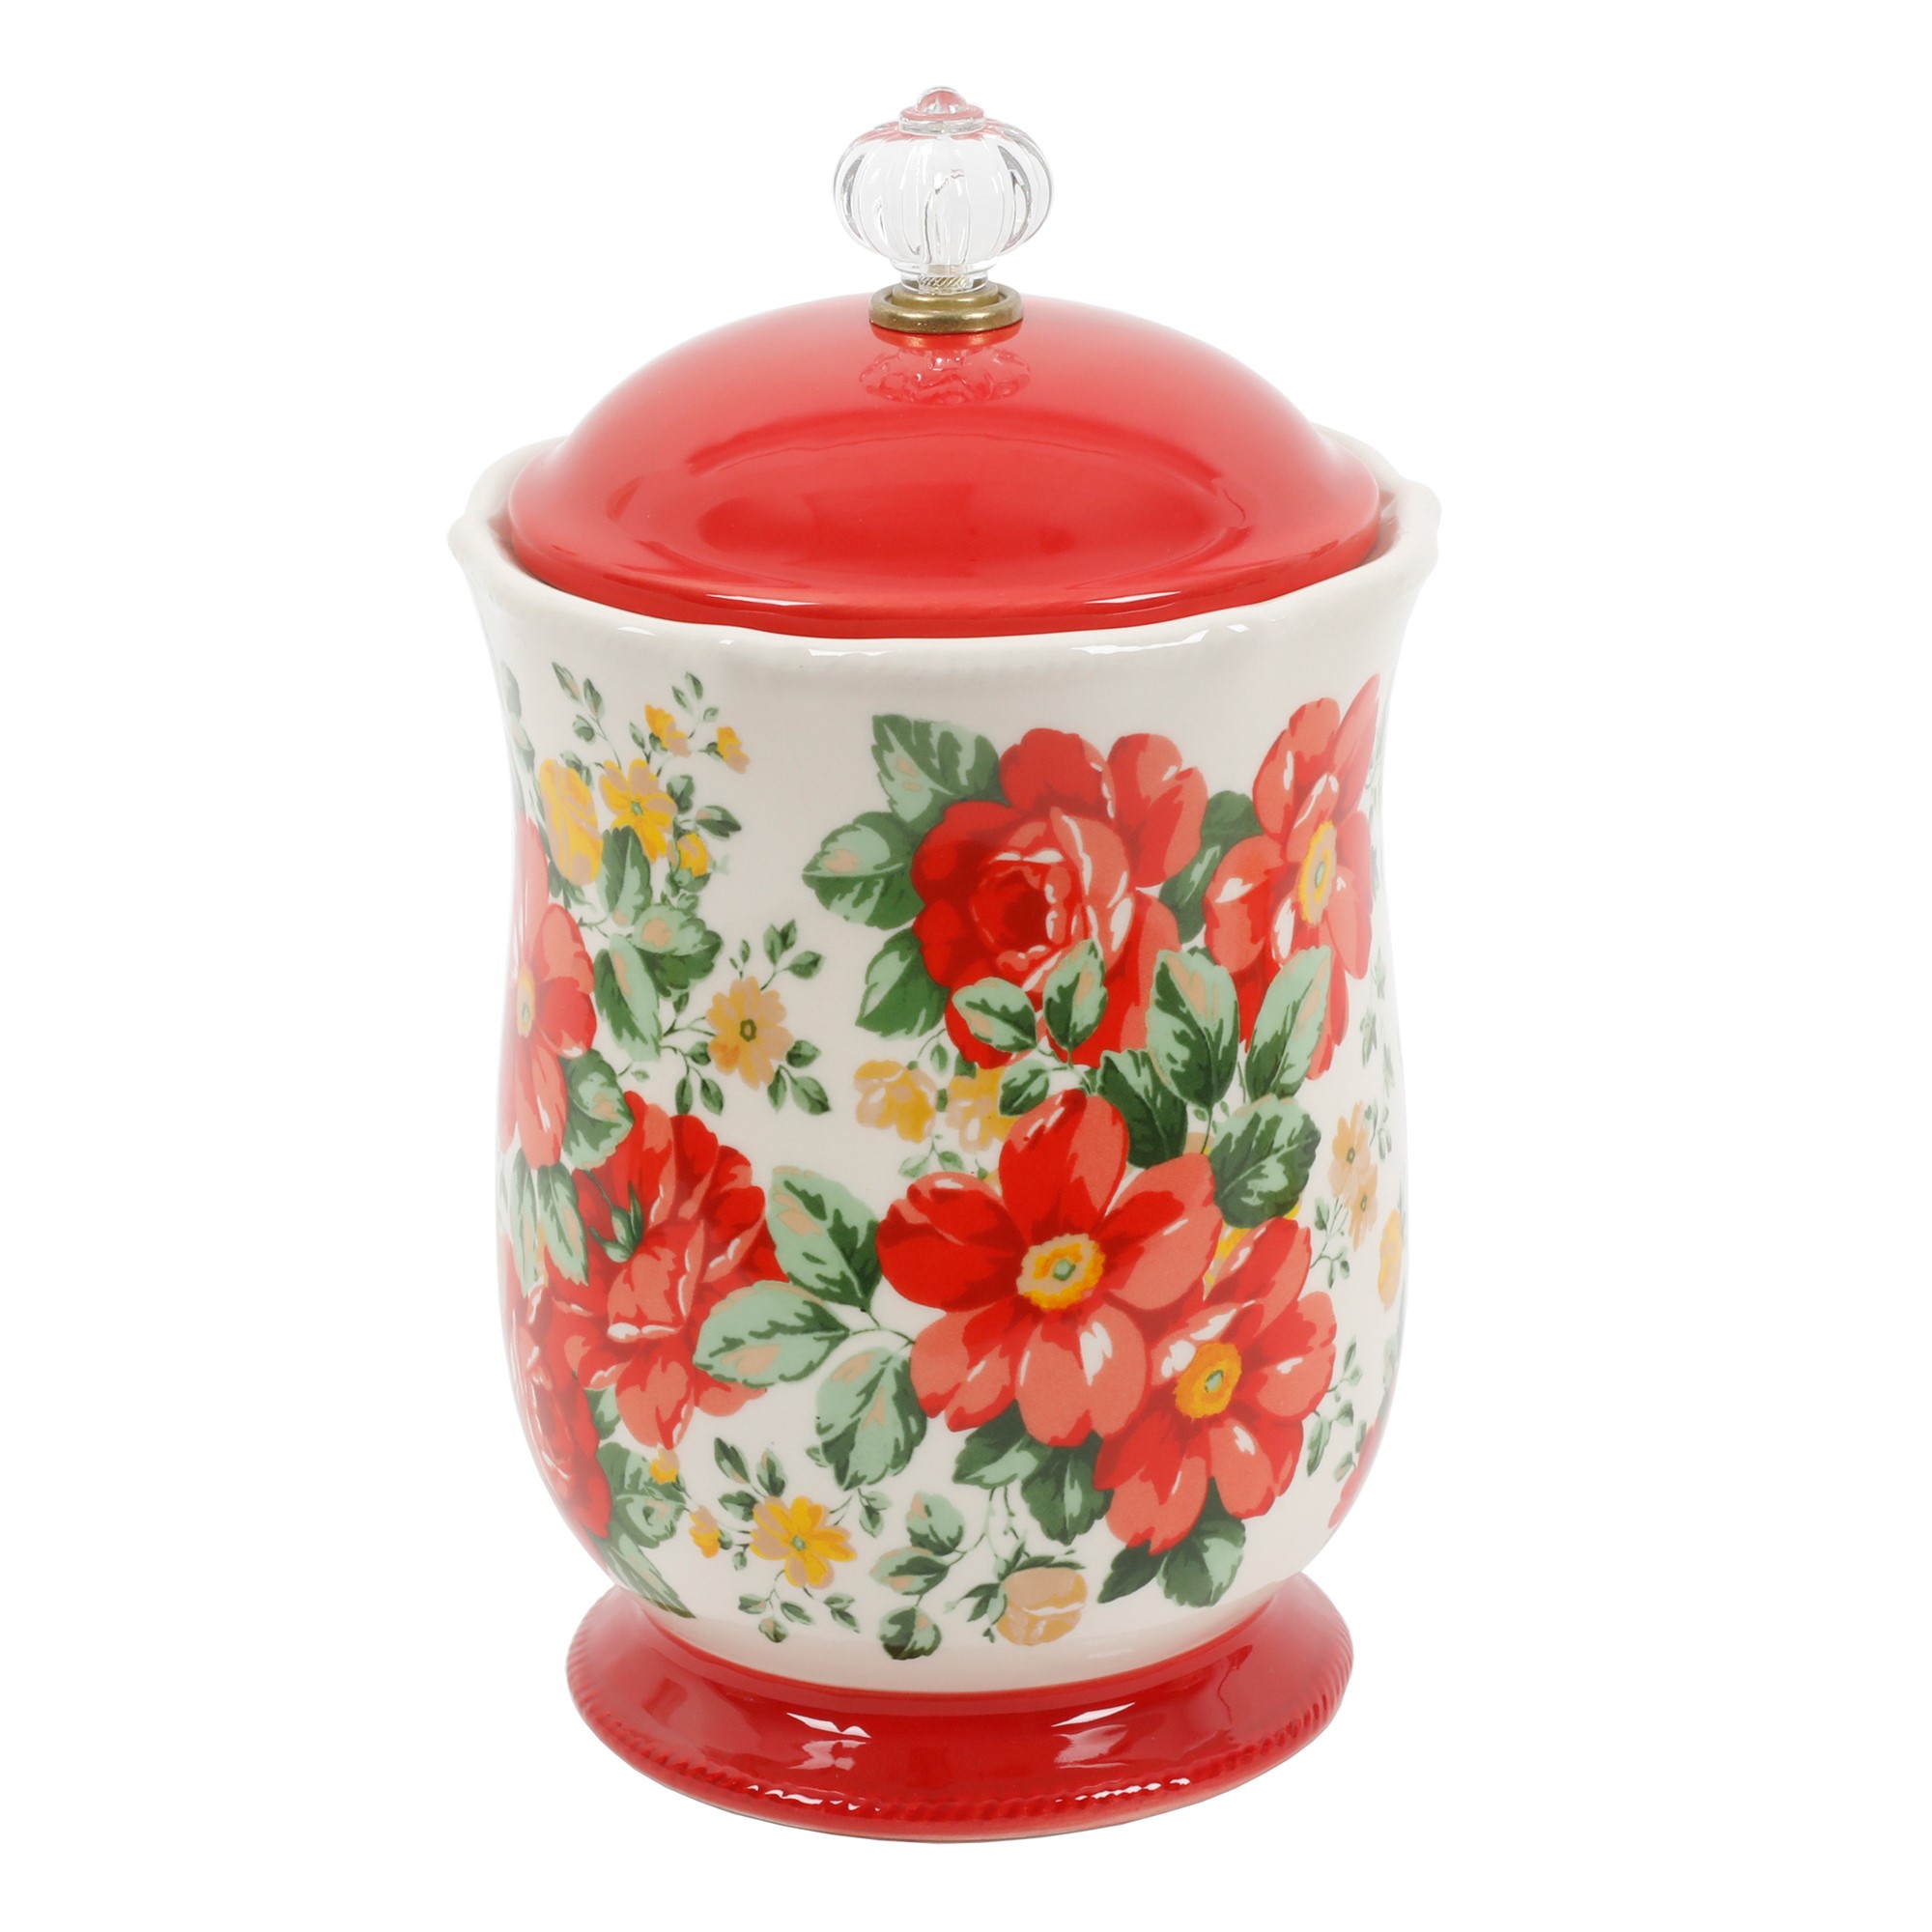 The Pioneer Woman Vintage Floral Canister with Acrylic Knob, 10" - image 1 of 5